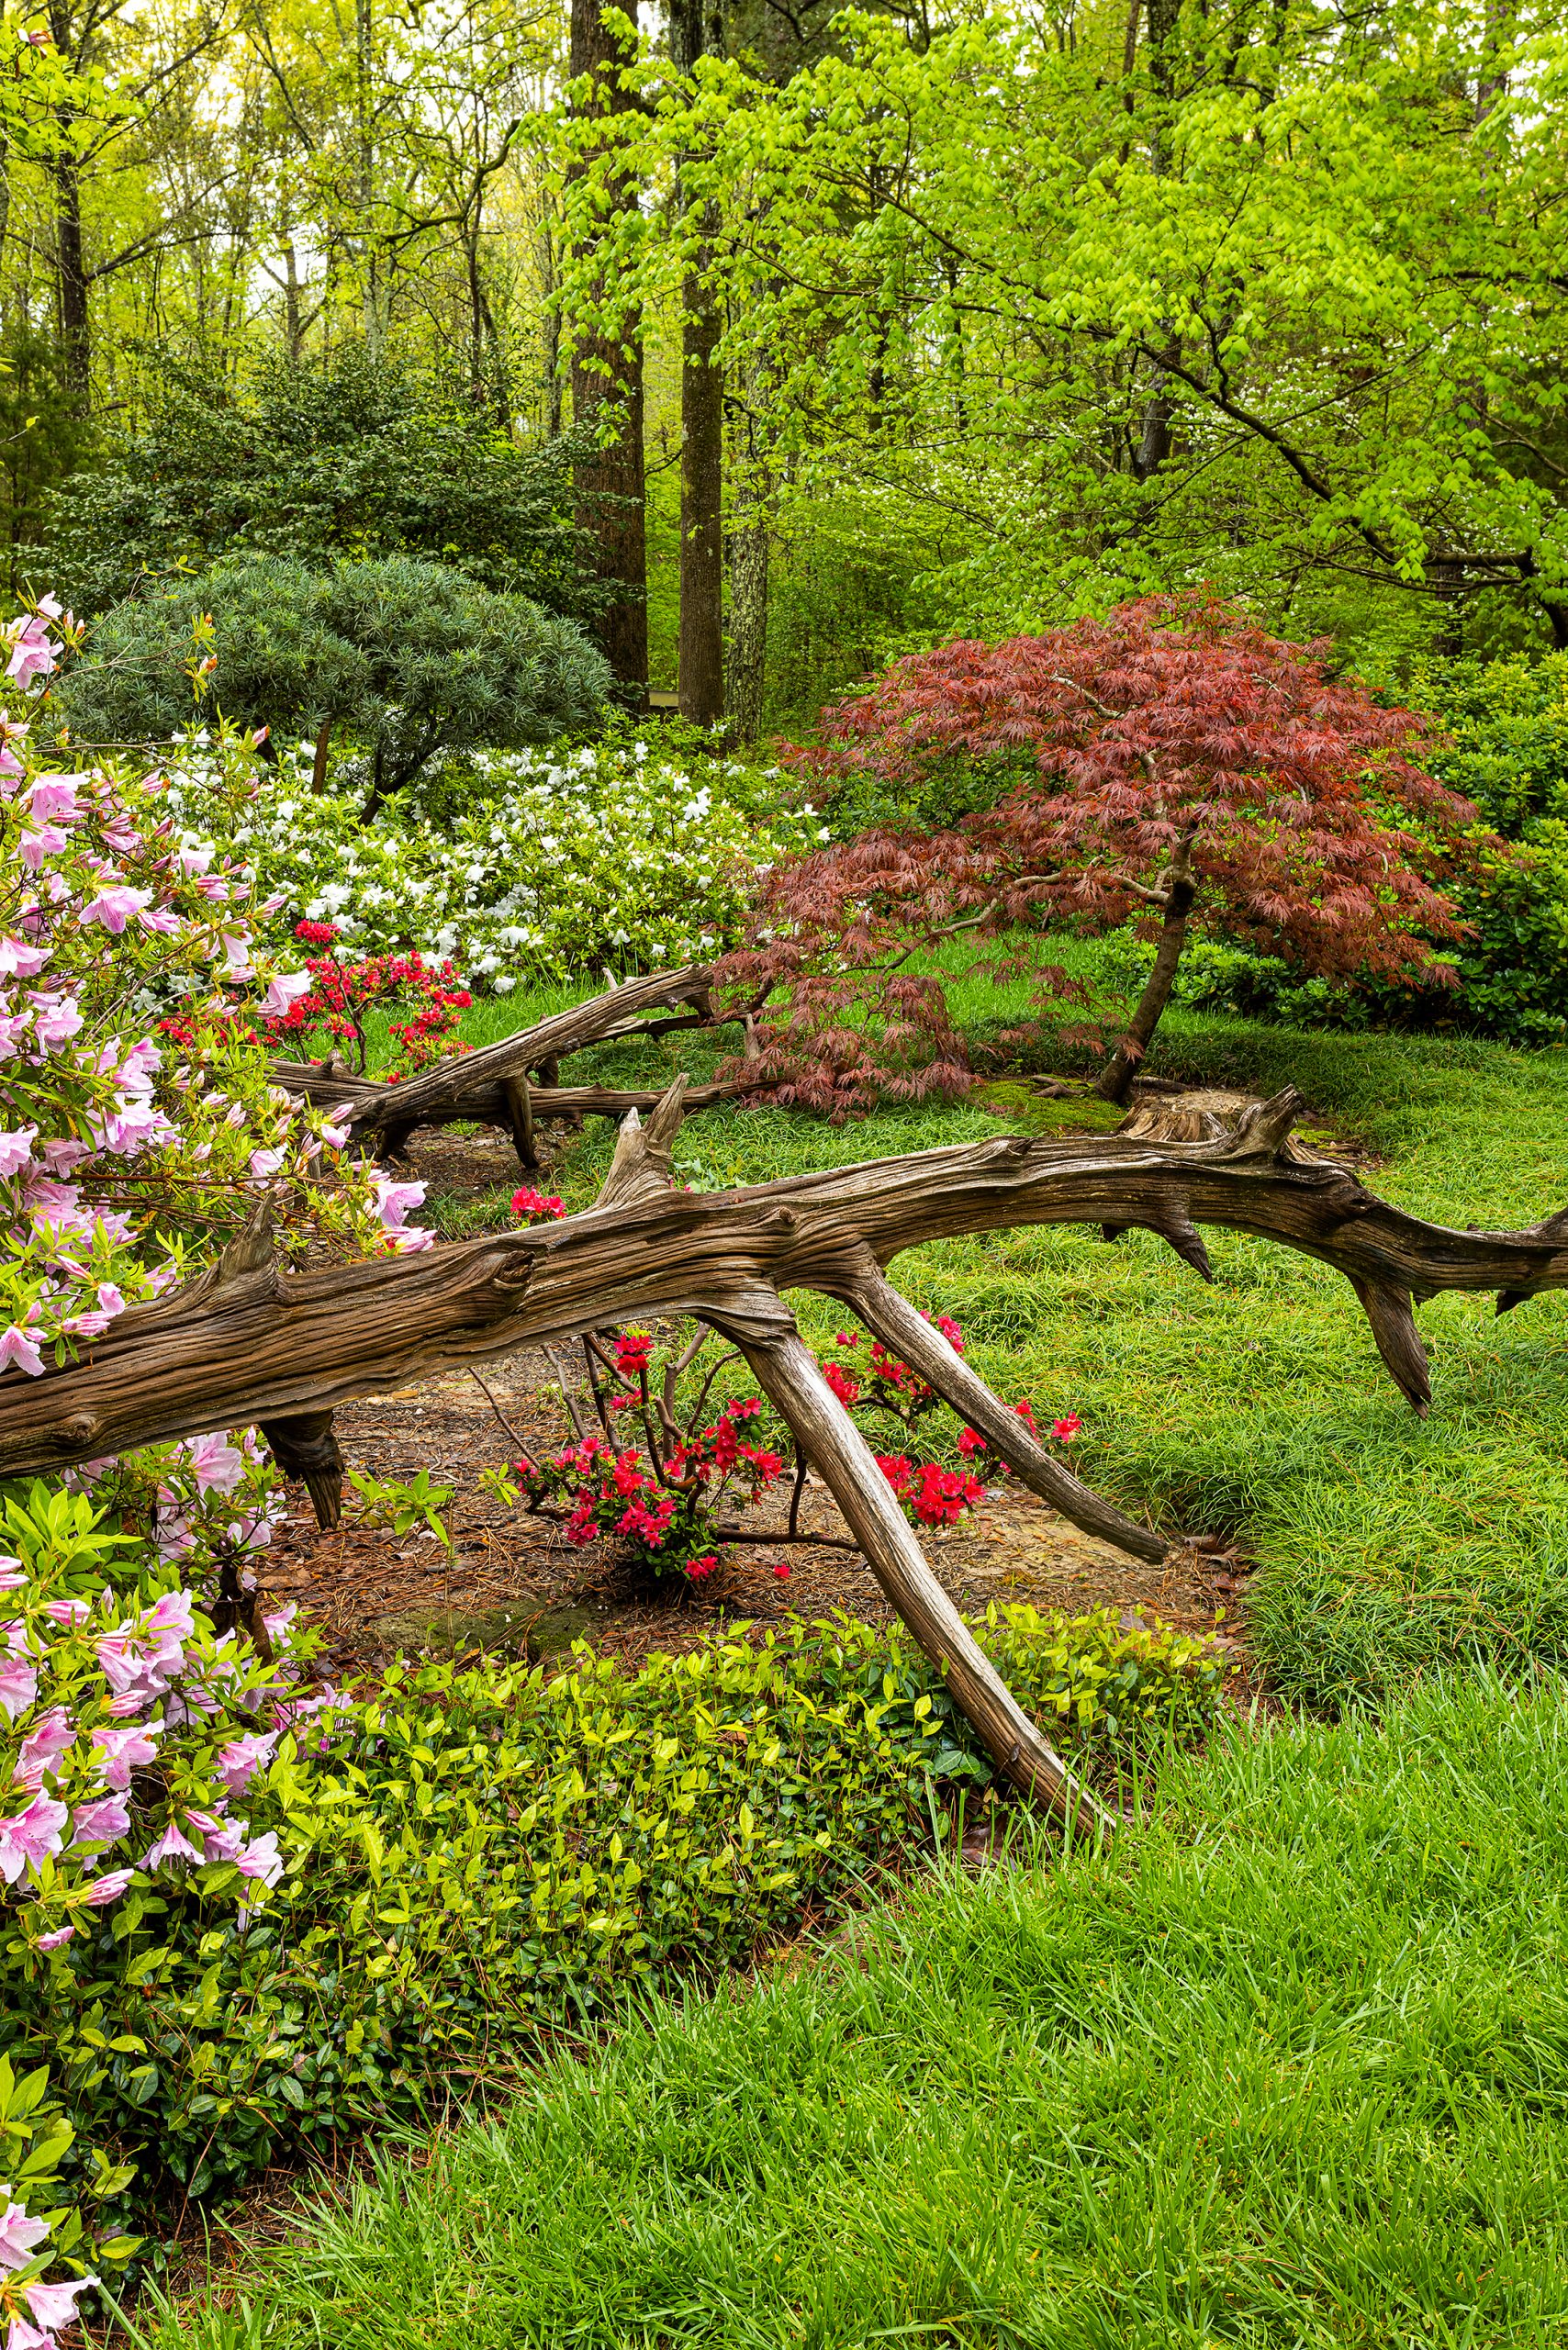 Japanese gardens are for sitting and viewing. The gardener’s job is to improve its design continuously, pruning shrubs, trees, and hedges. Leaves or petals falling to the ground are just as ornamental and enjoyable as carefully placed plants or stones.